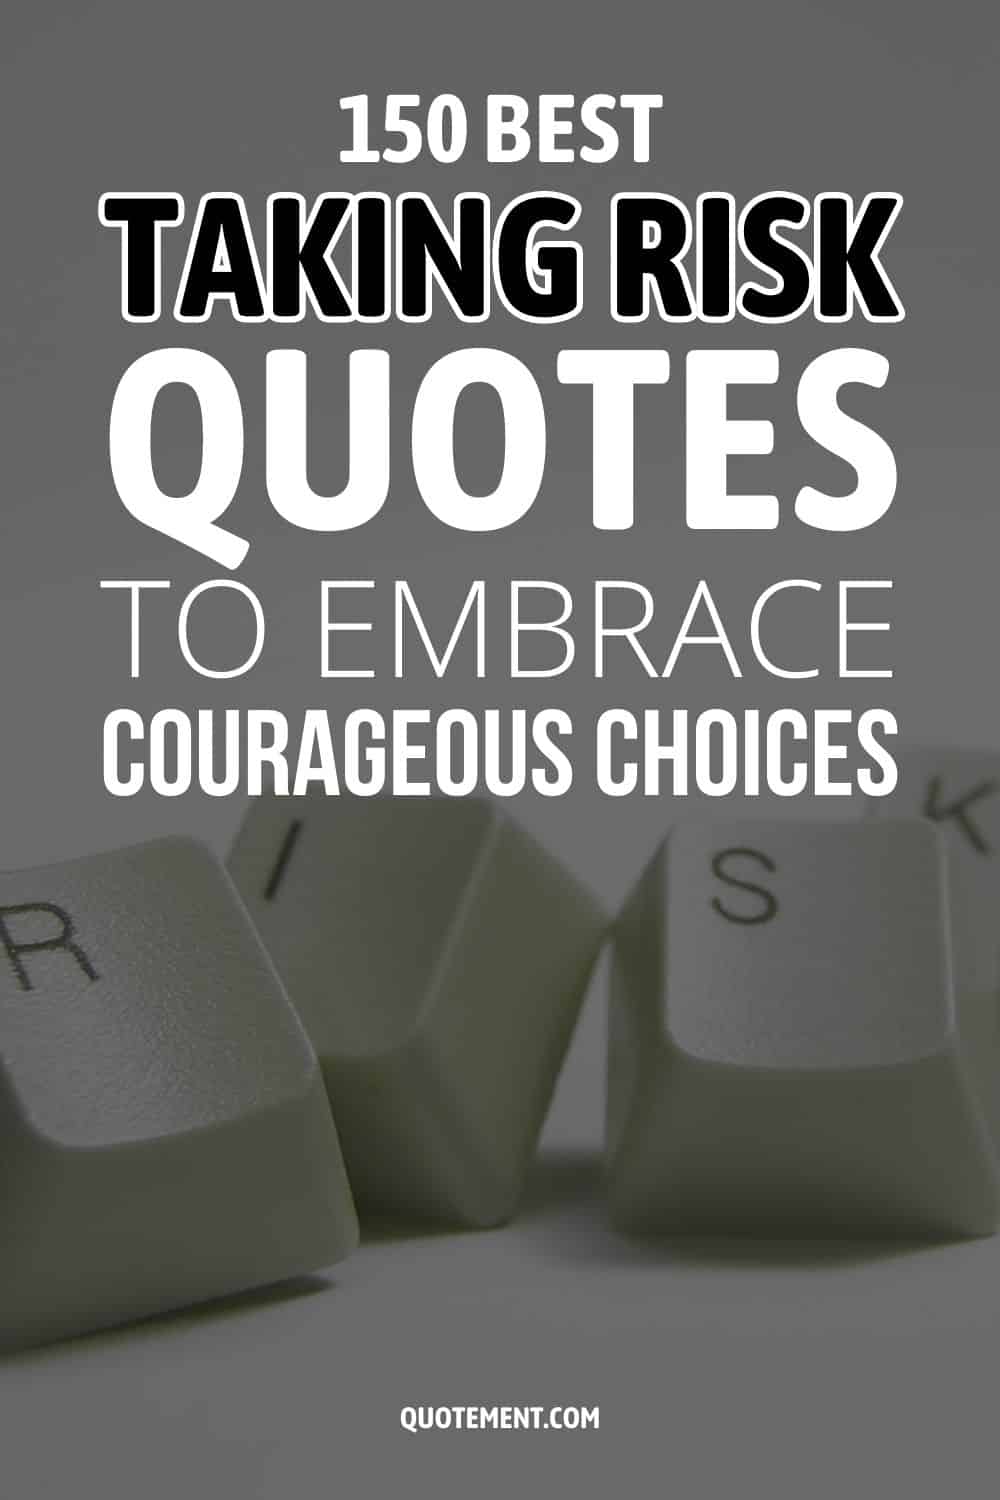 150 Best Taking Risk Quotes To Embrace Courageous Choices
